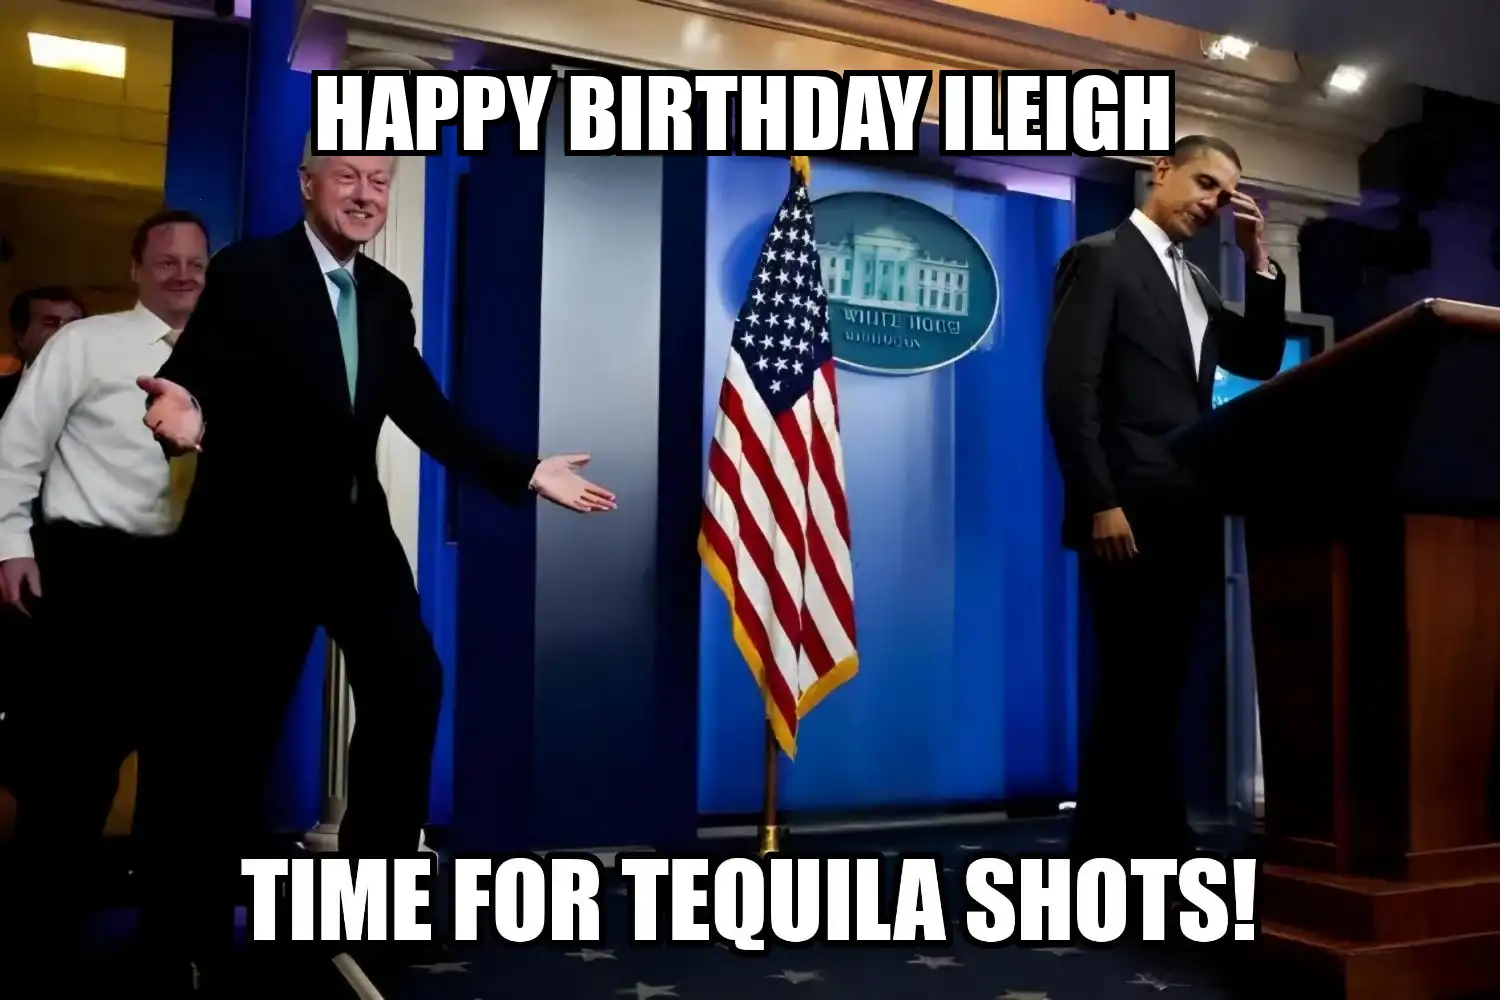 Happy Birthday Ileigh Time For Tequila Shots Memes